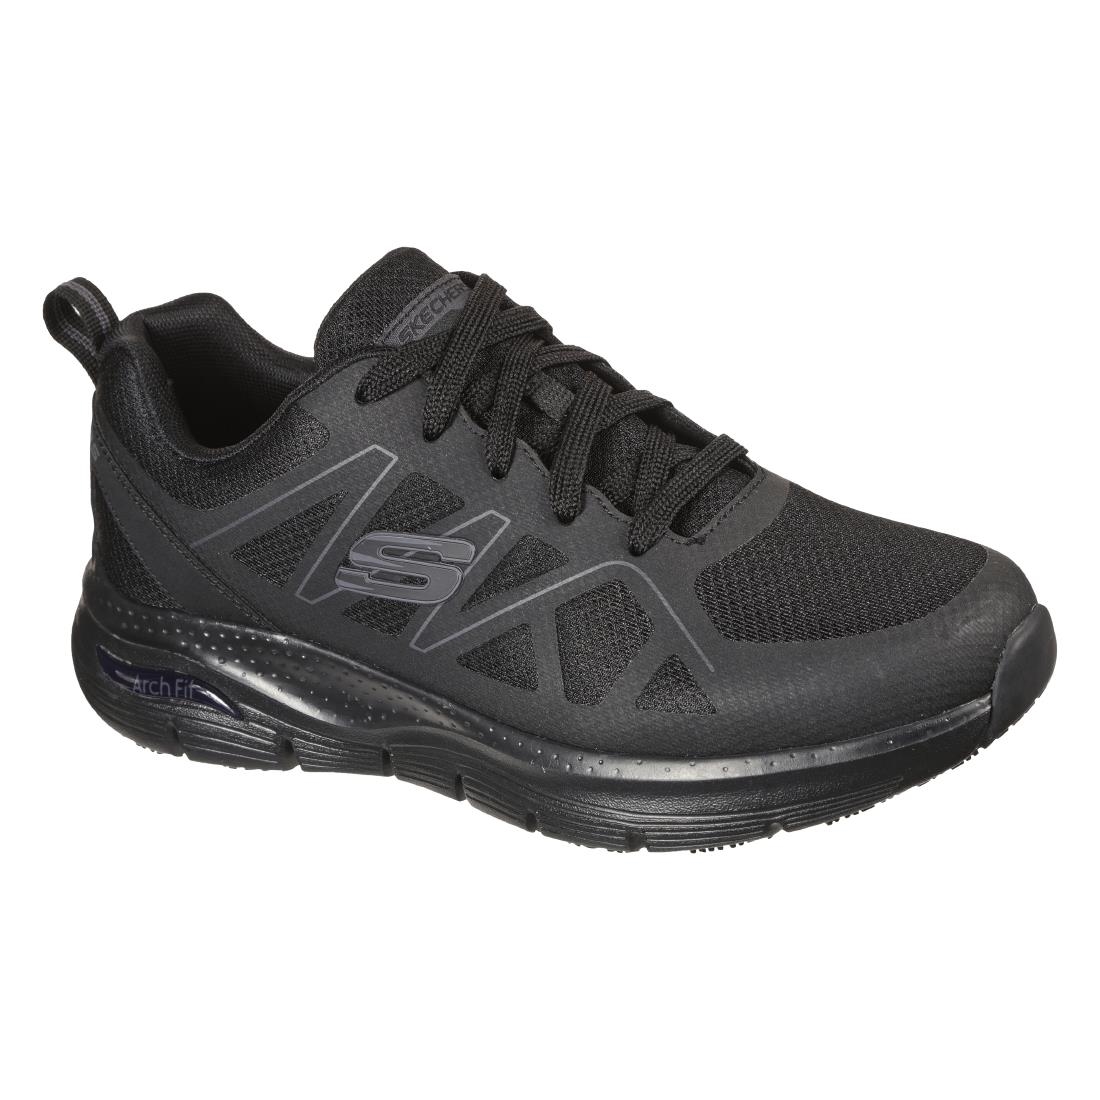 Skechers Axtell Slip Resistant Arch Fit Trainer Size 47.5